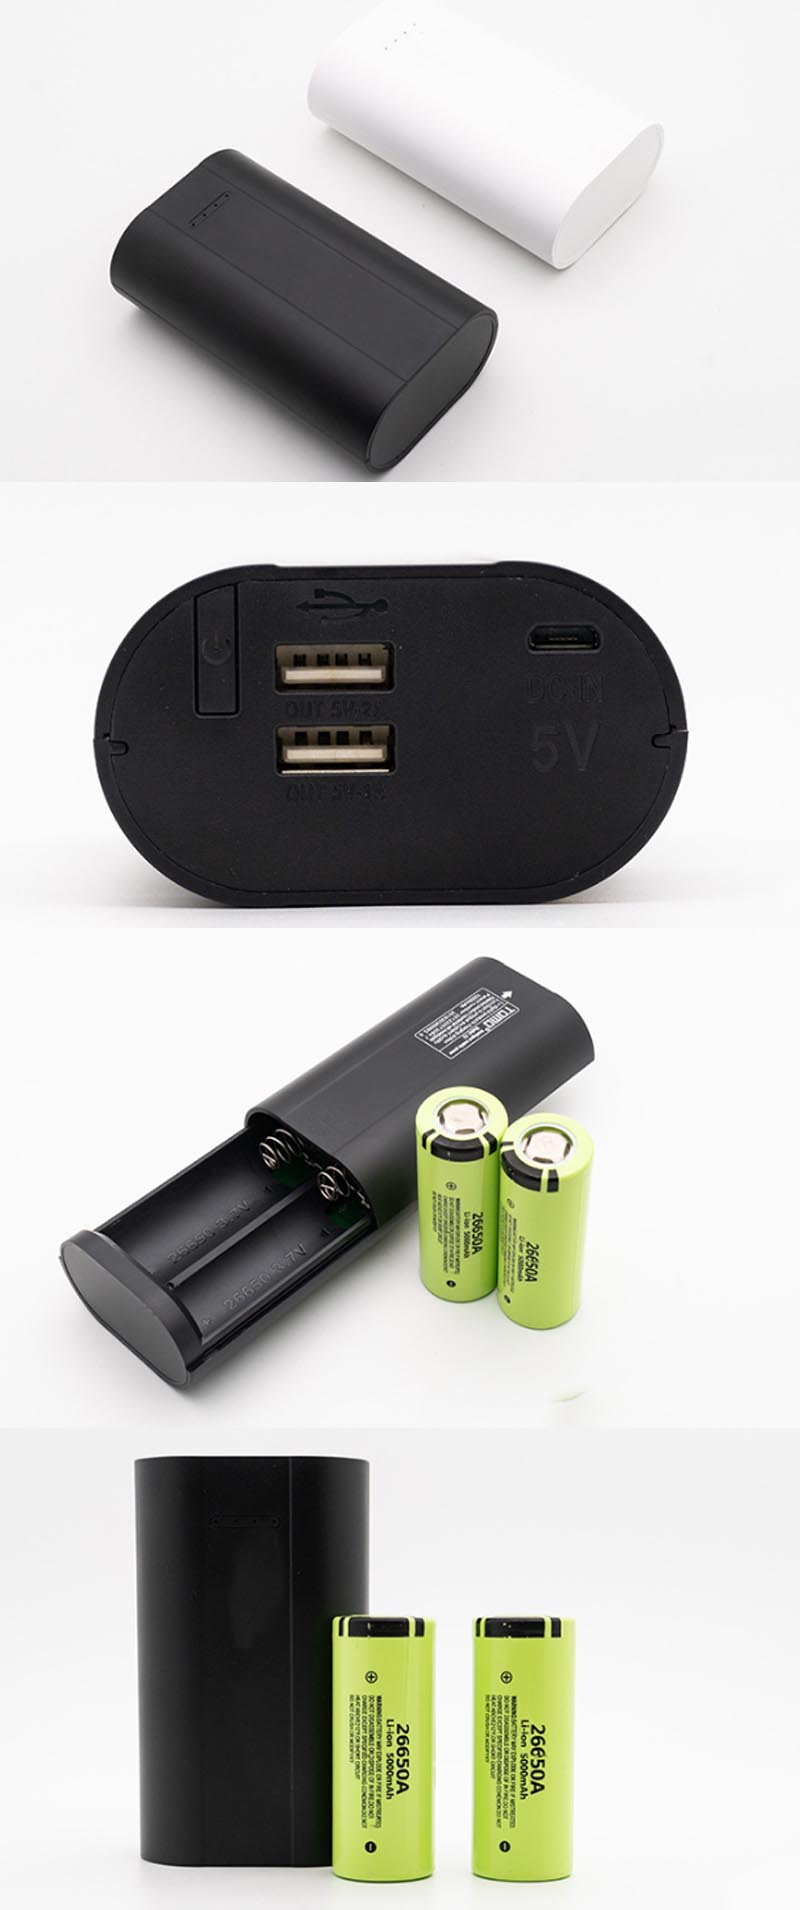 TOMO-26650-Li-on-Battery-Charger-Portable-Power-Bank-Travel-Camping-Hiking-USB-Battery-Charger-1405482